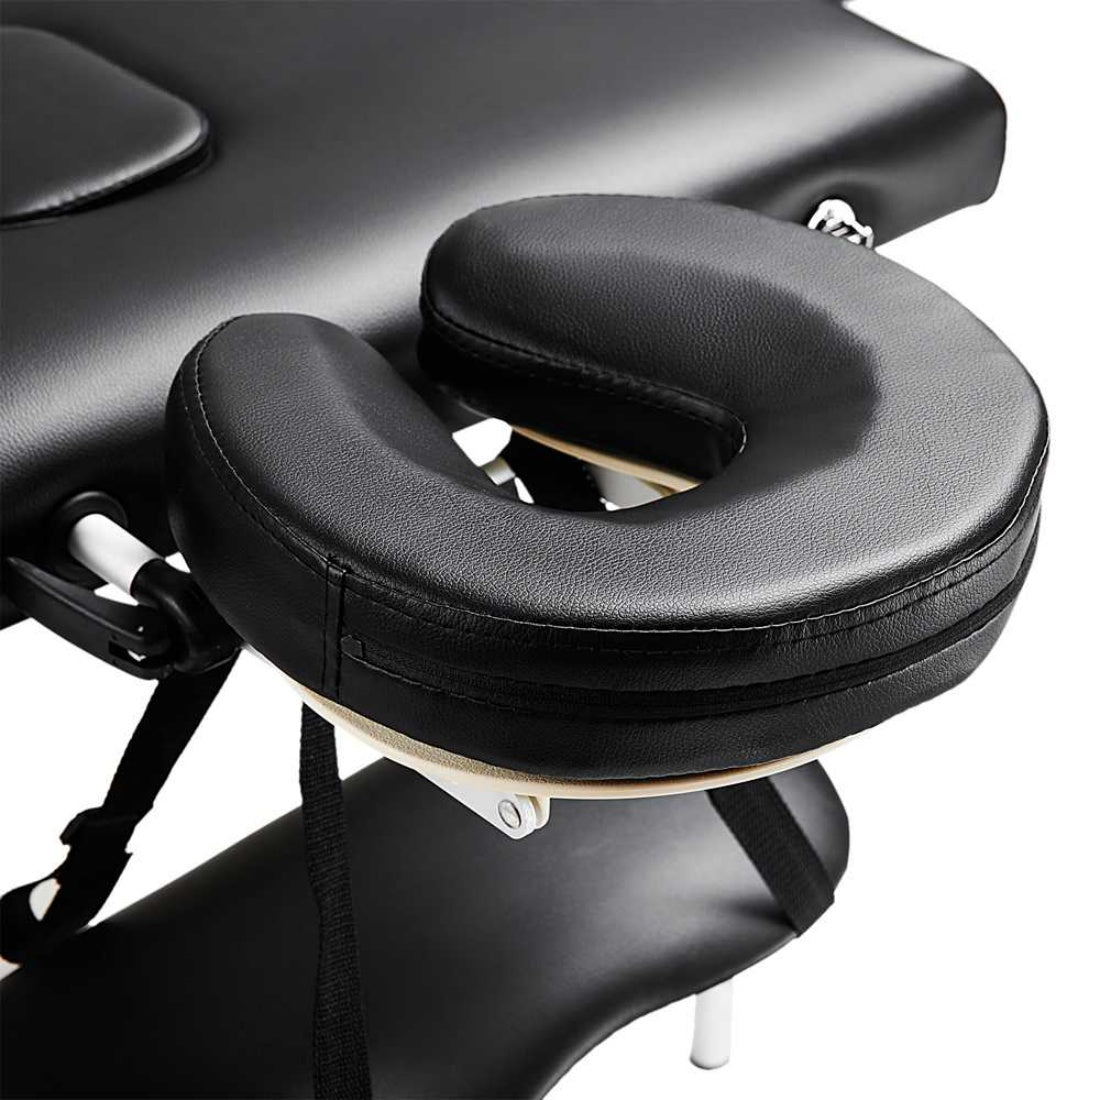 Relaxpro 75cm Portable Aluminium Massage Table 3 Fold Beauty Therapy Bed